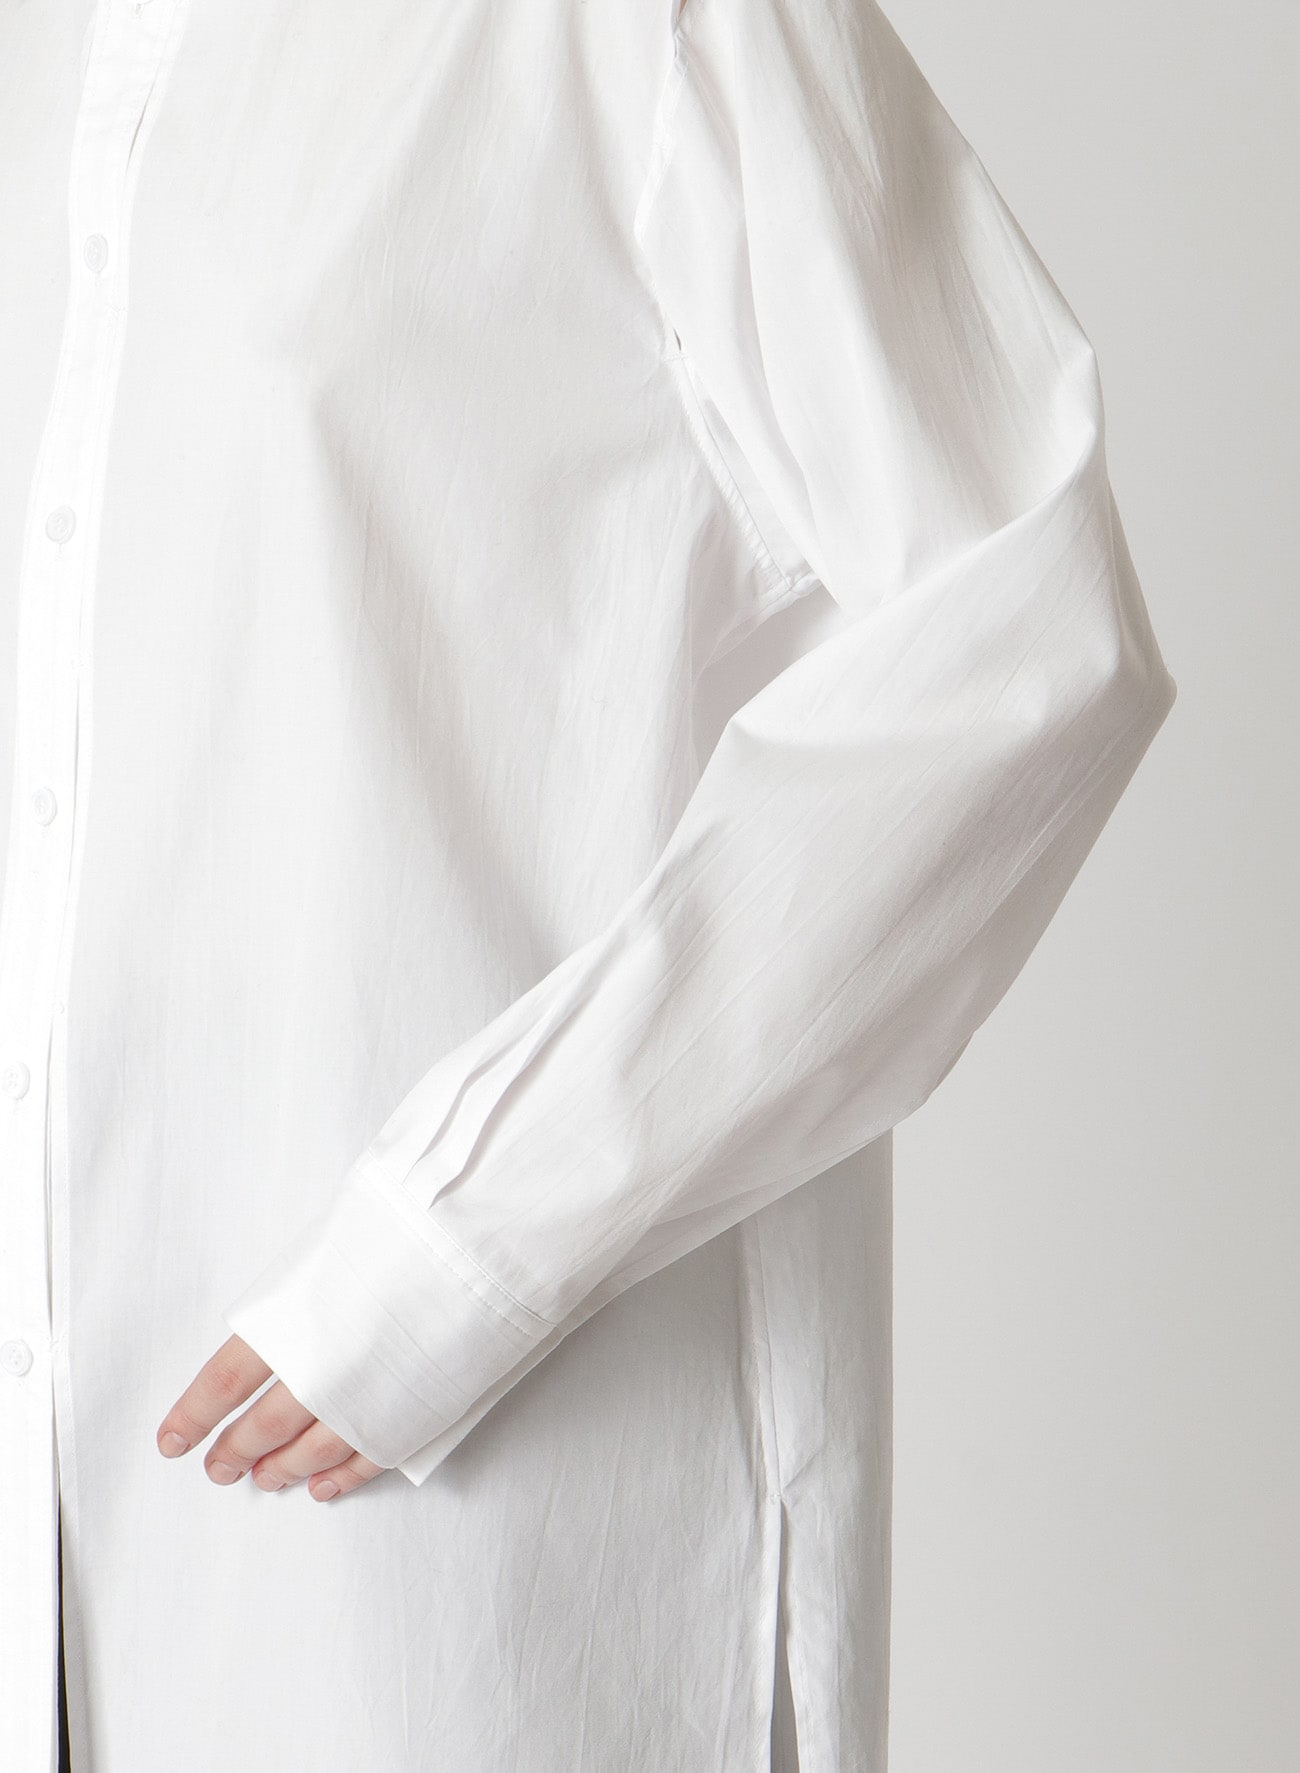 Y#39;s deconstructed cotton shirt - White